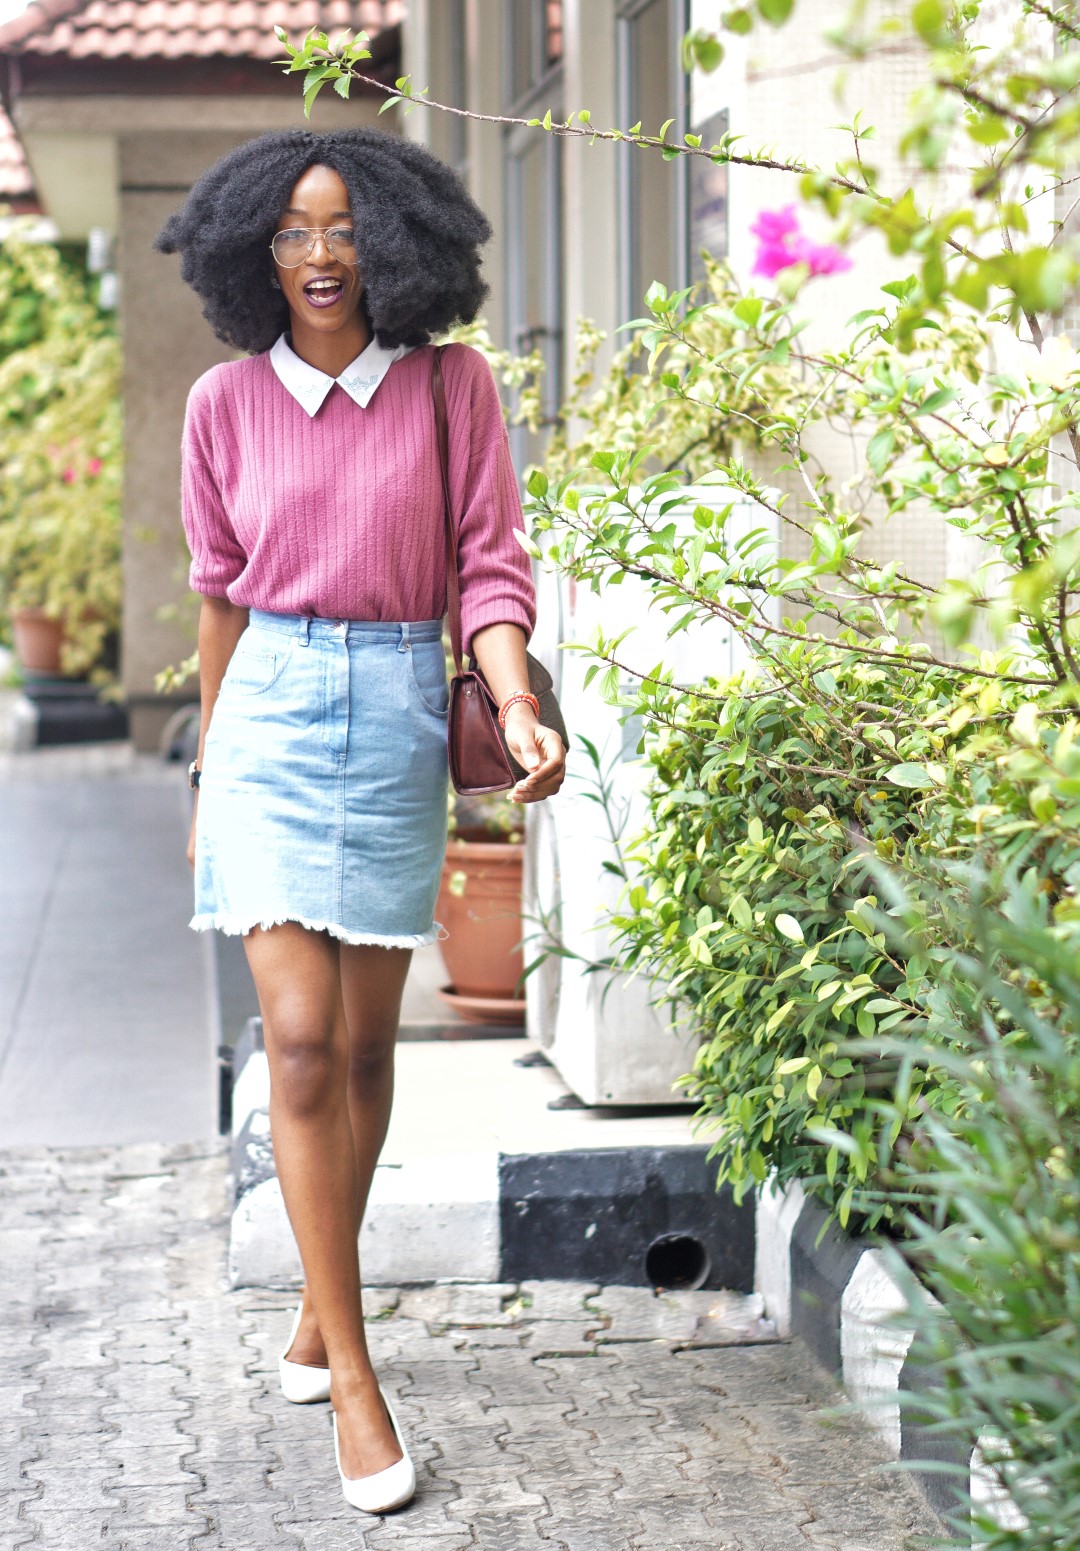 nigerian fashion blogger Cassie daves sporting a big afro, denim mini skirt, and white court shoes